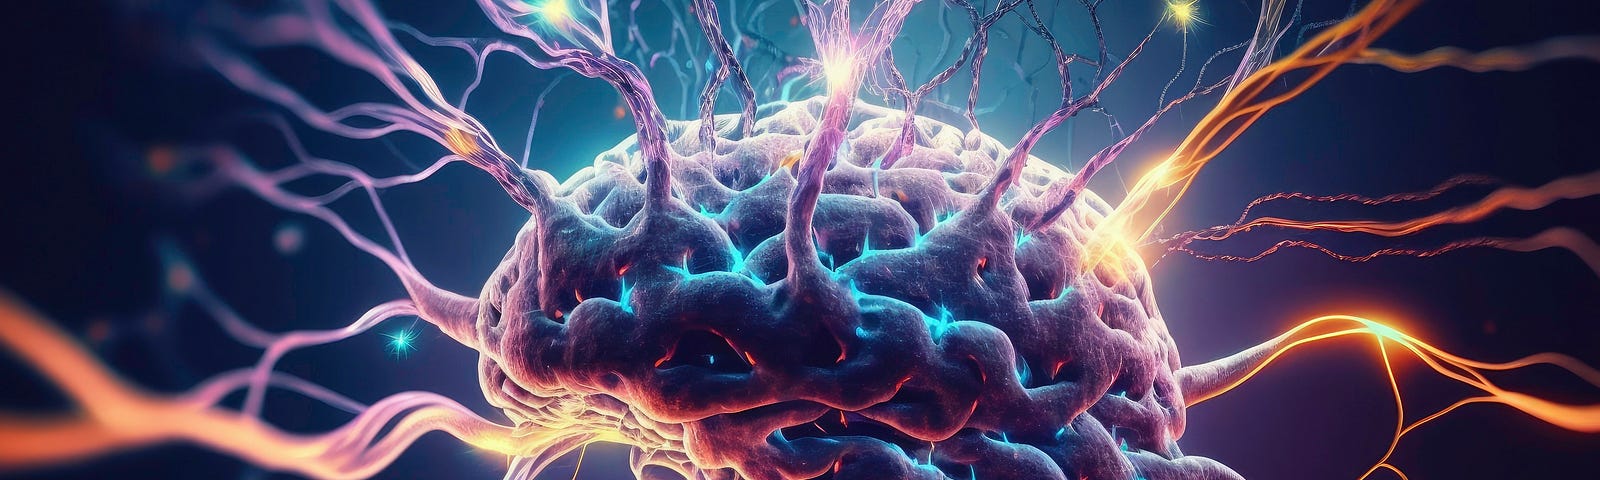 A color illustration of a brain with tendrils extending in every direction.A new small study shows intermittent energy restriction can lead to brain changes that make you less inclined to overeat. Moreover, the approach can boost the variety of gut microorganisms.